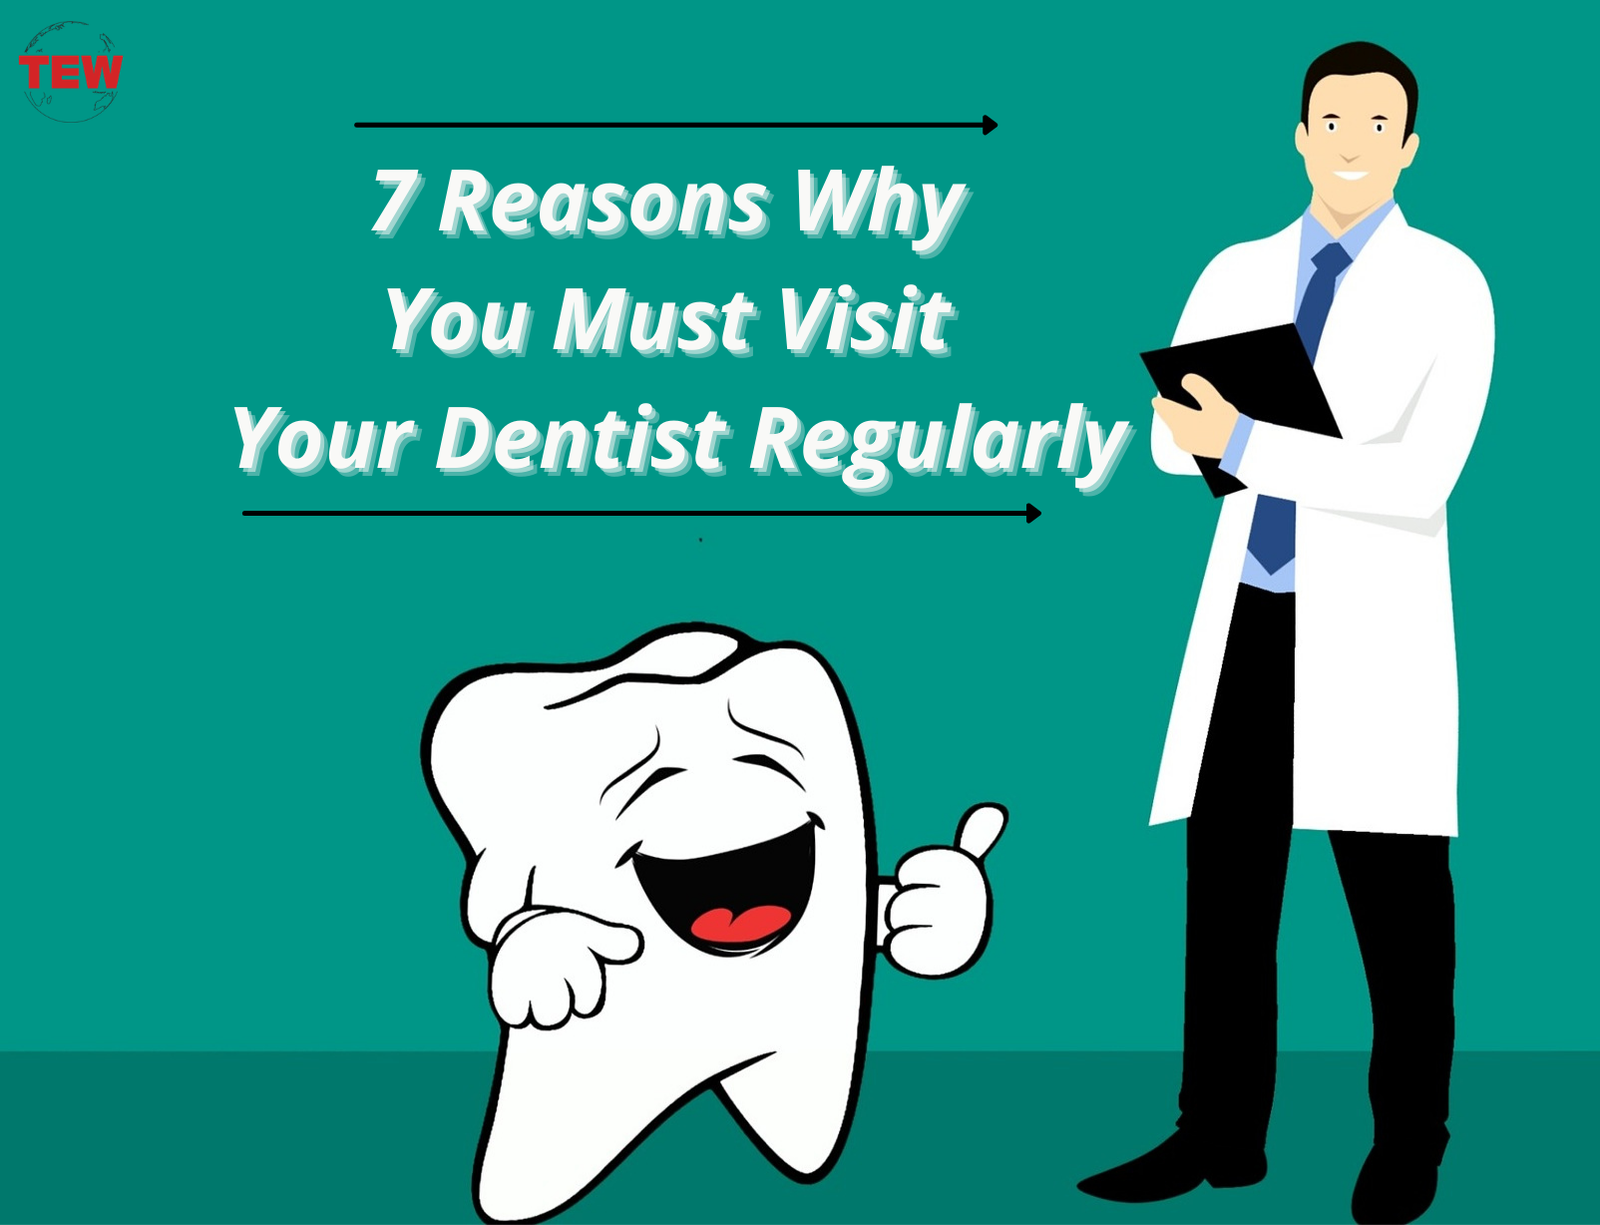 7 Reasons Why You Must Visit Your Dentist Regularly